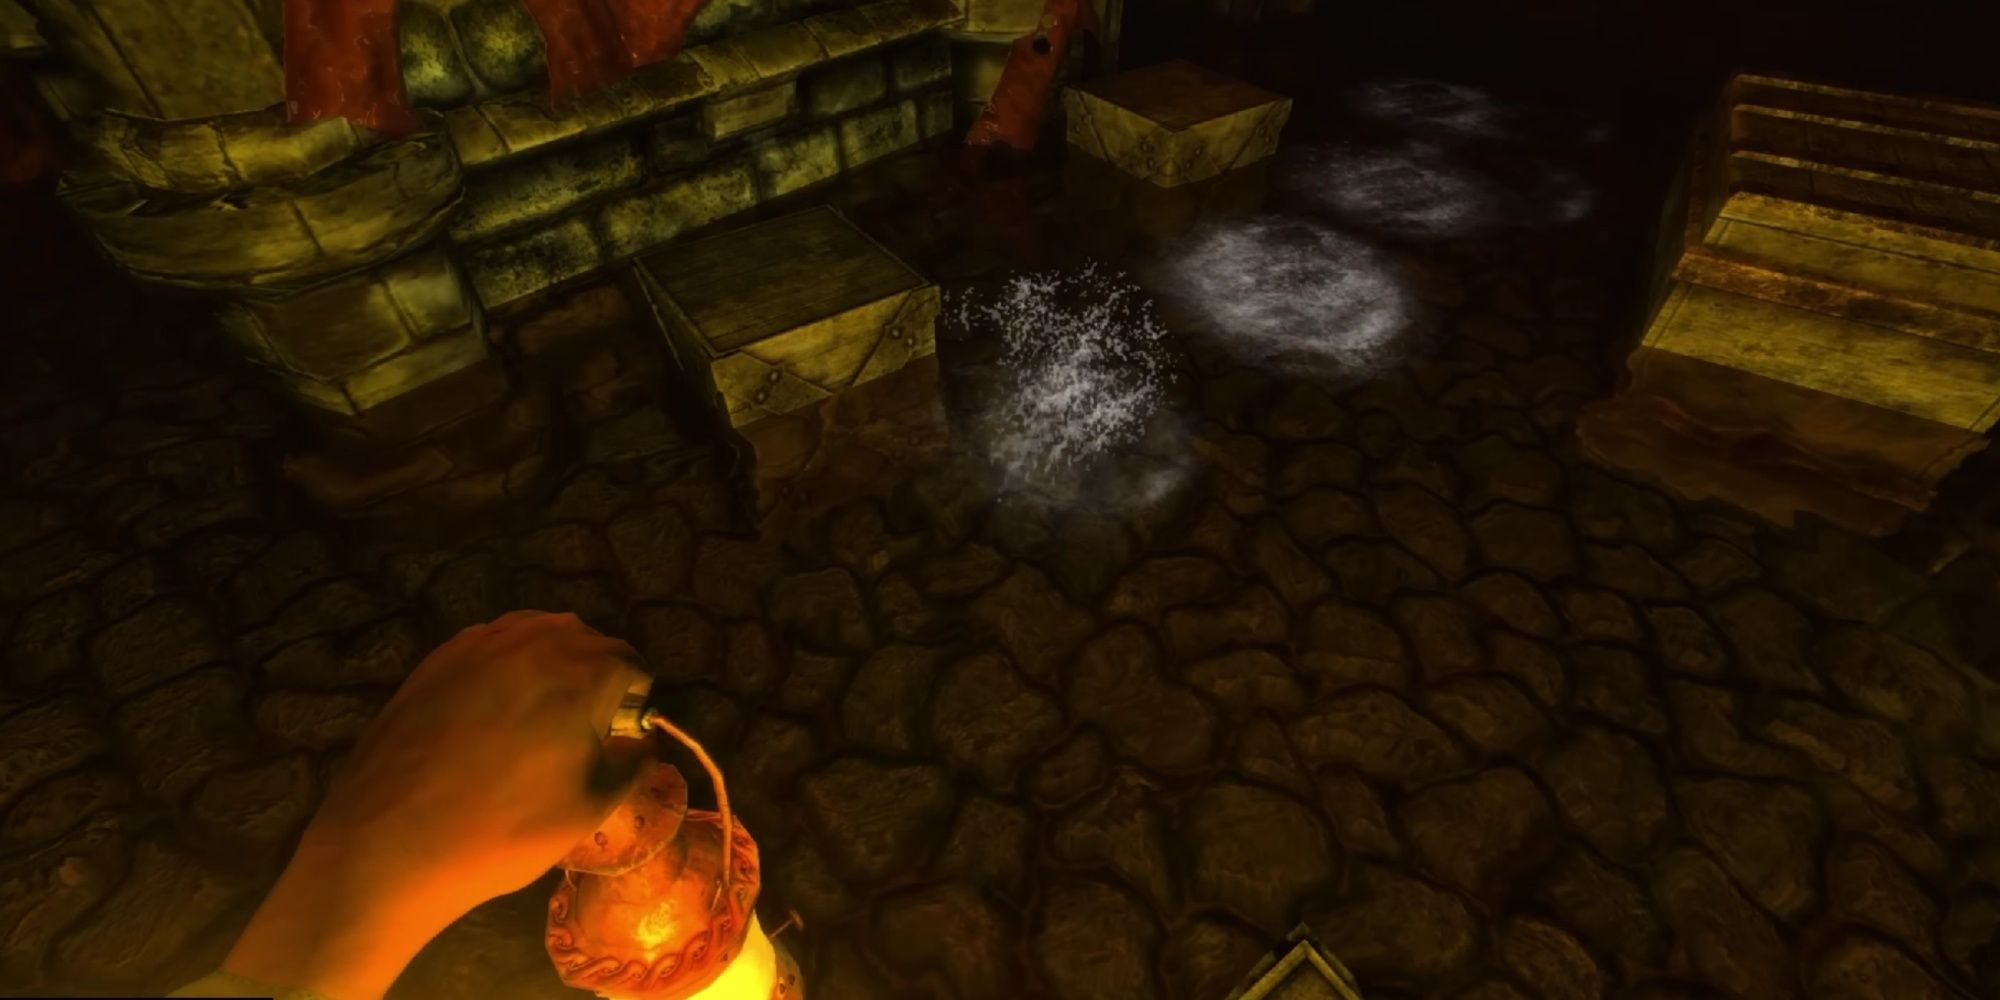 Daniel holding a lantern on top of a box as a Kaernk enemy splashes nearby in Amnesia: The Dark Descent